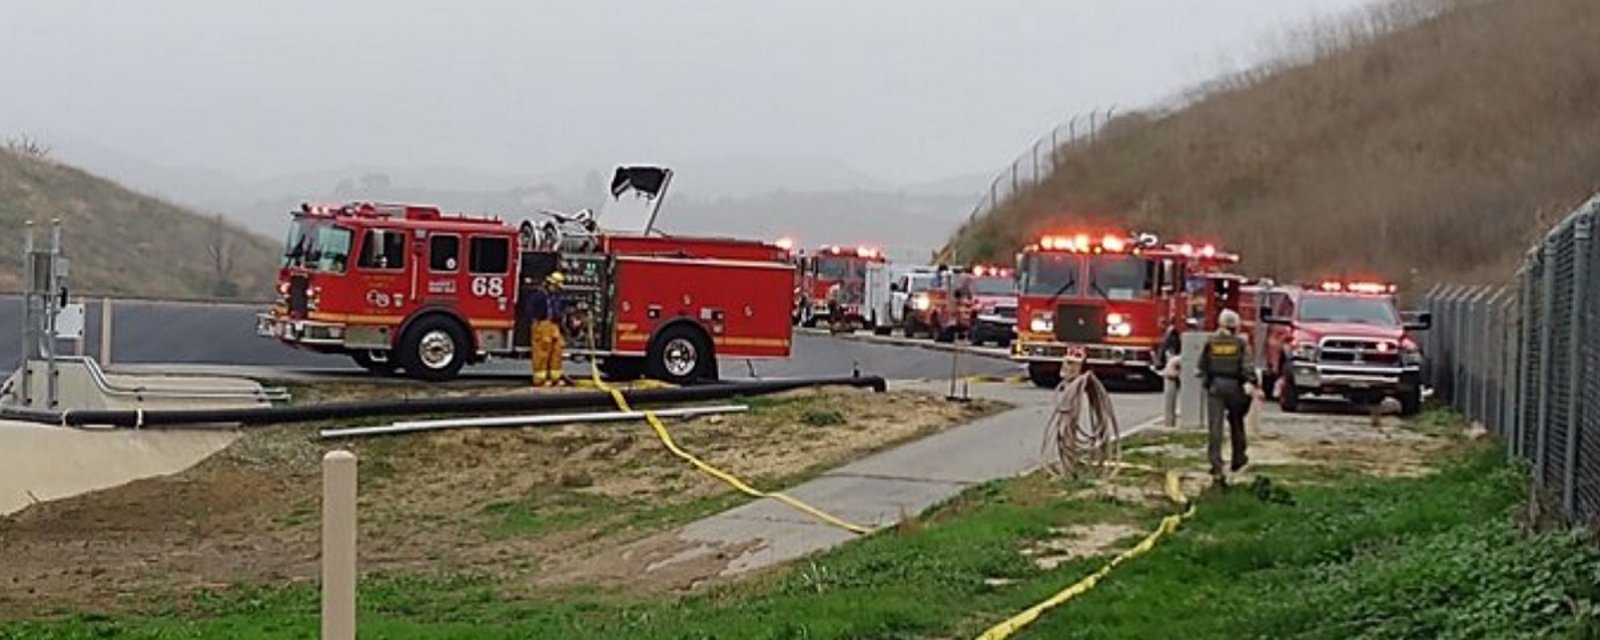 Update: Death toll in fatal helicopter crash that killed Kobe Bryant rises to 9.